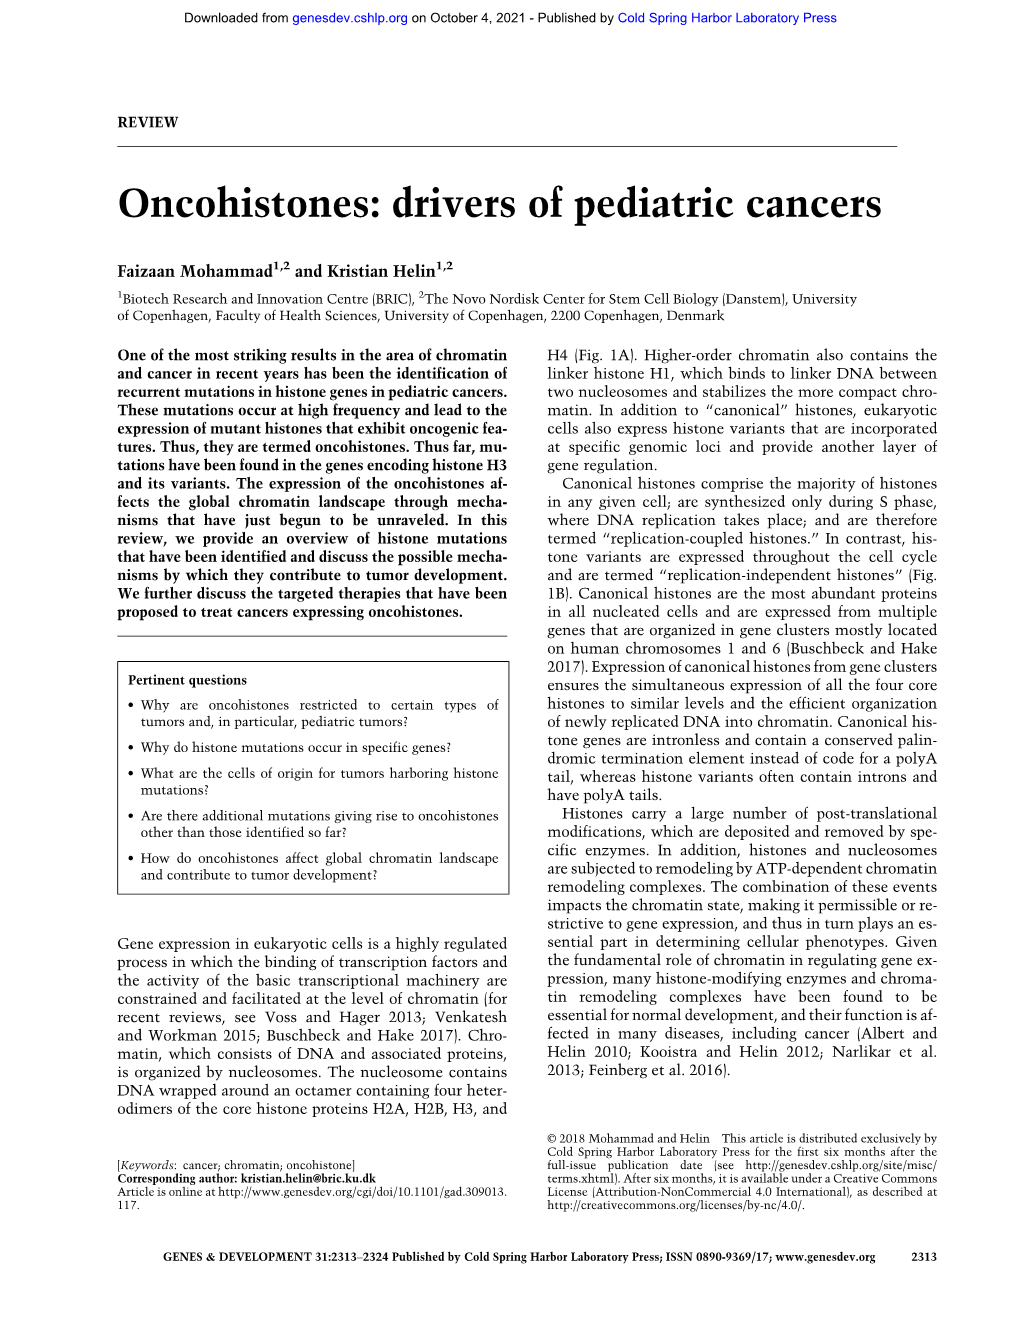 Oncohistones: Drivers of Pediatric Cancers